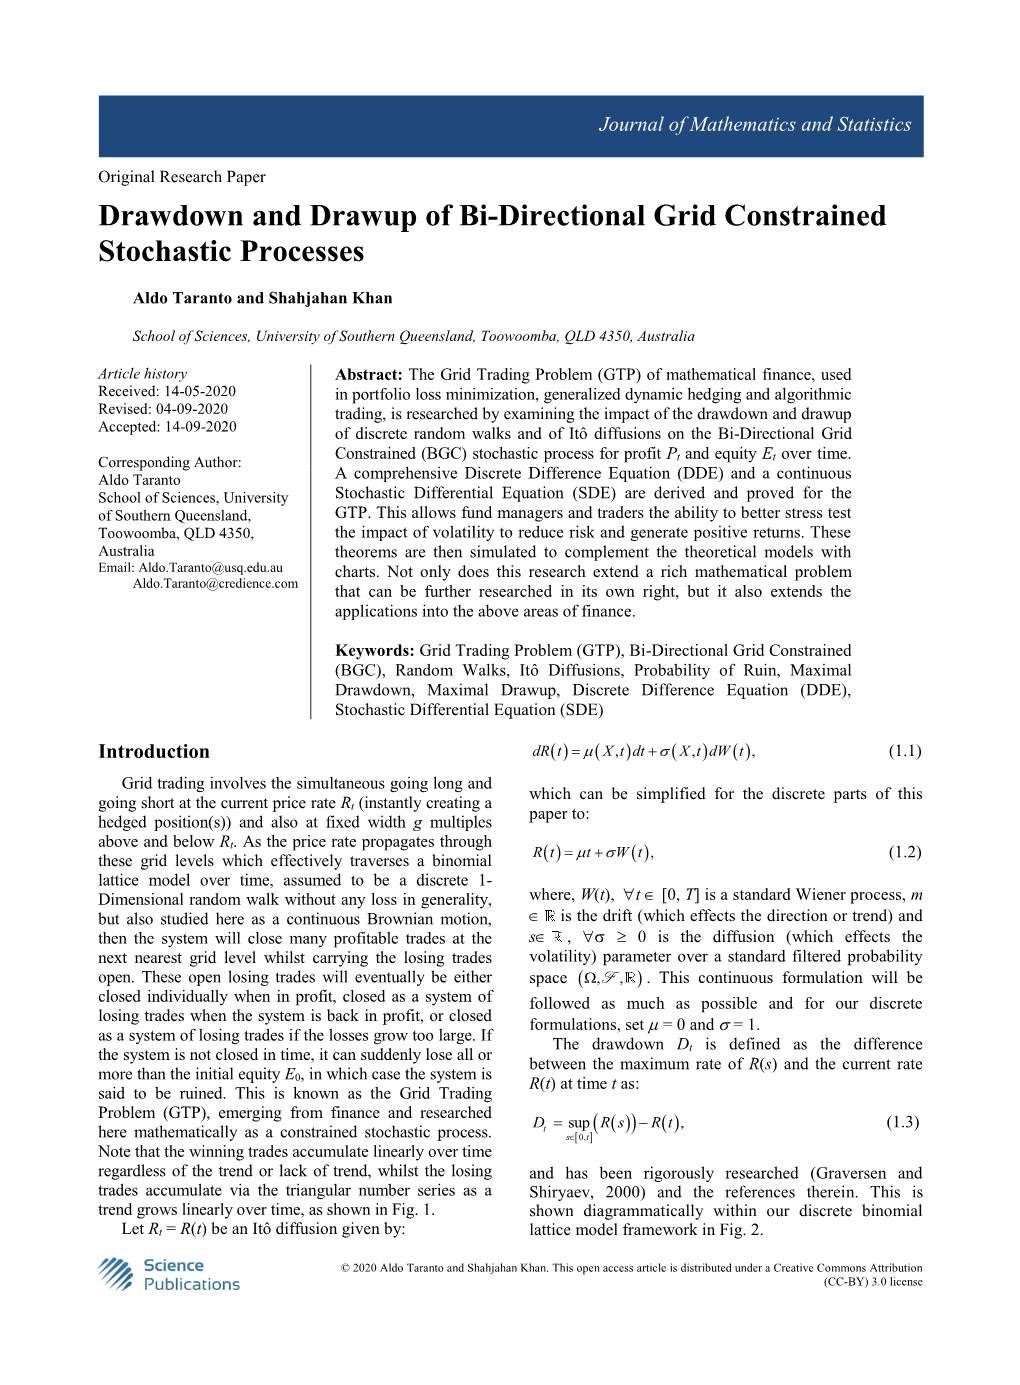 Drawdown and Drawup of Bi-Directional Grid Constrained Stochastic Processes